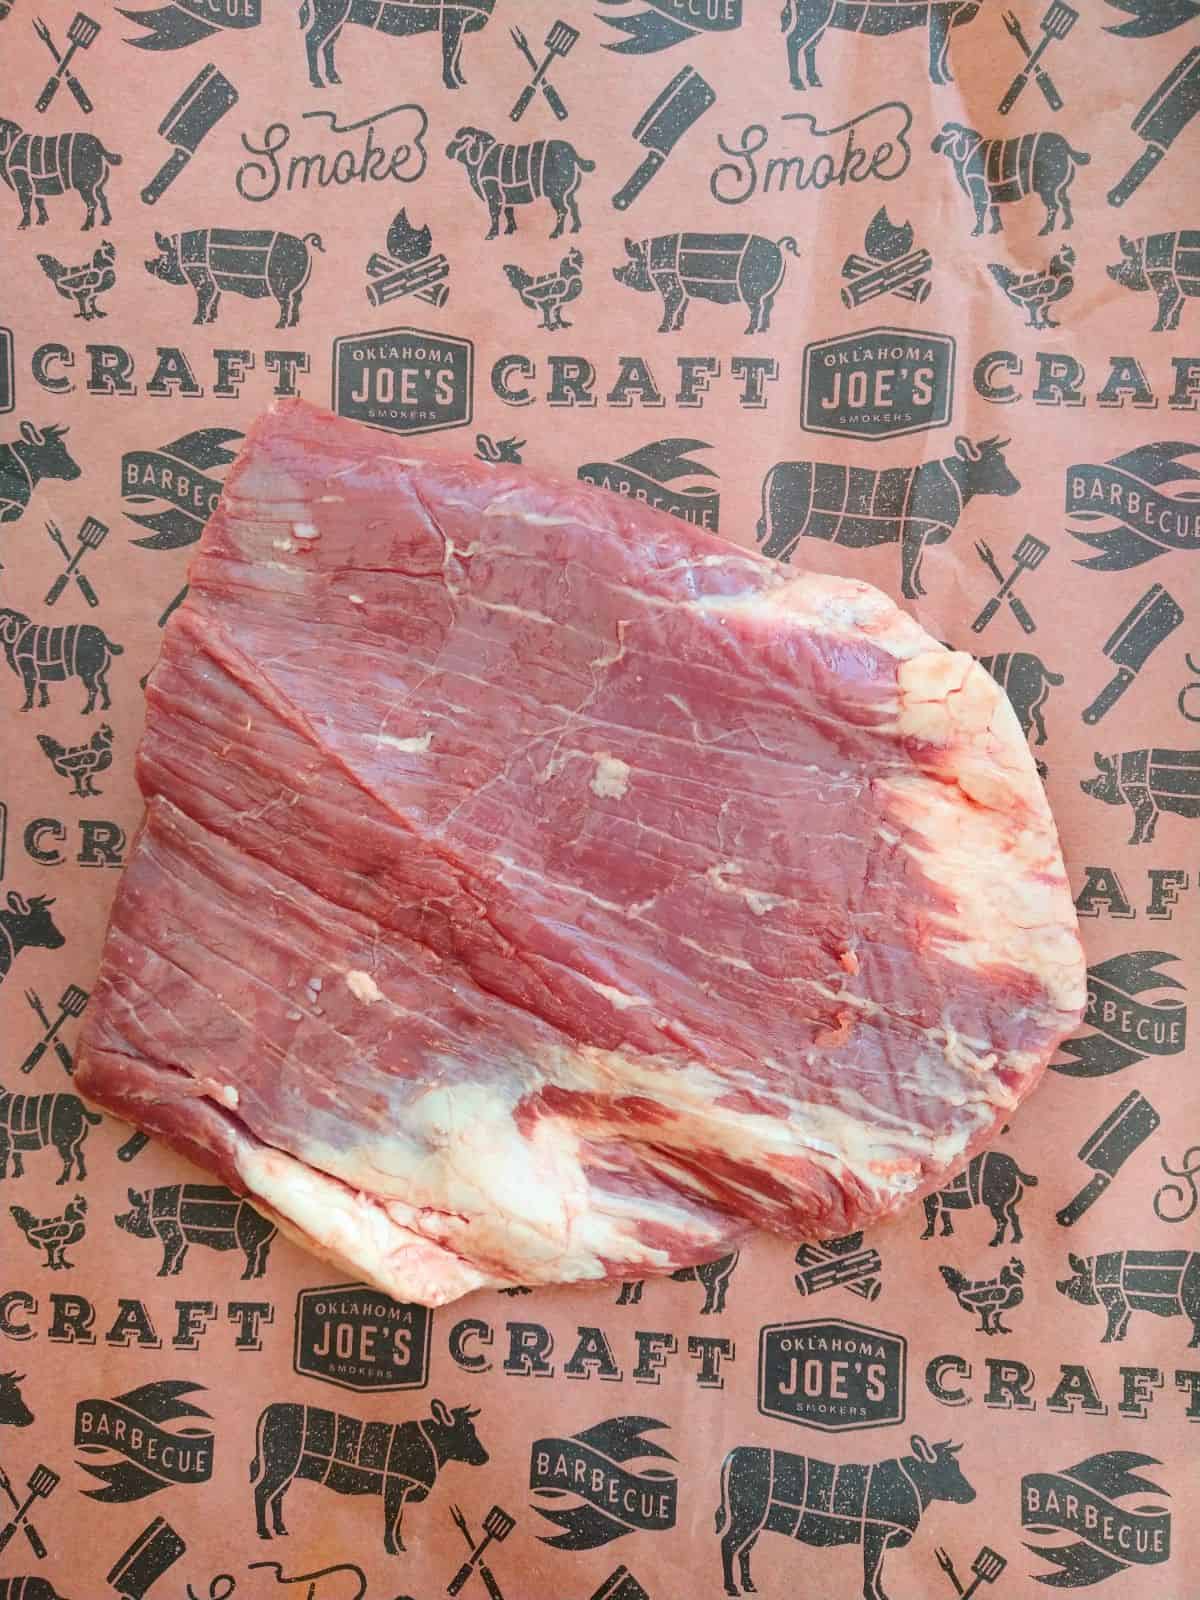 A raw flank steak sitting on a piece of reddish colored butcher paper with grilling images on it. 